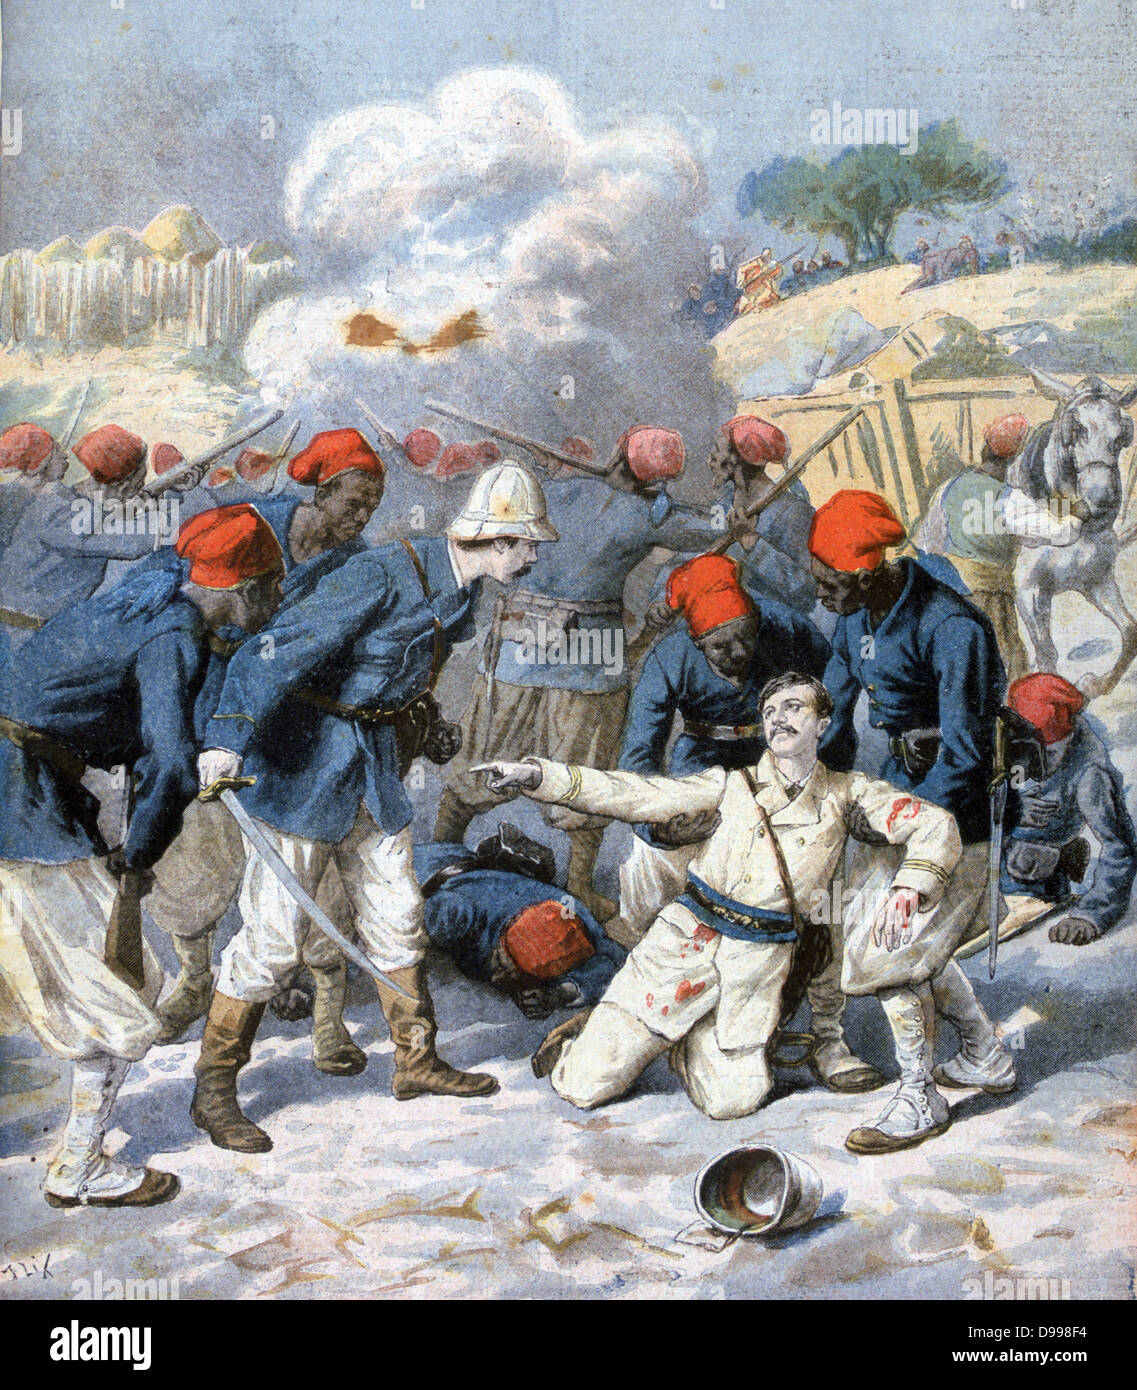 Death of Lieutenant Lecerf, surrounded by concerned Zouaves, at S'Napa, Upper Niger. Expansion of French territories in West Africa.  From 'Le Petit Journal', Paris, 9 March 1894. Military, Soldier Stock Photo